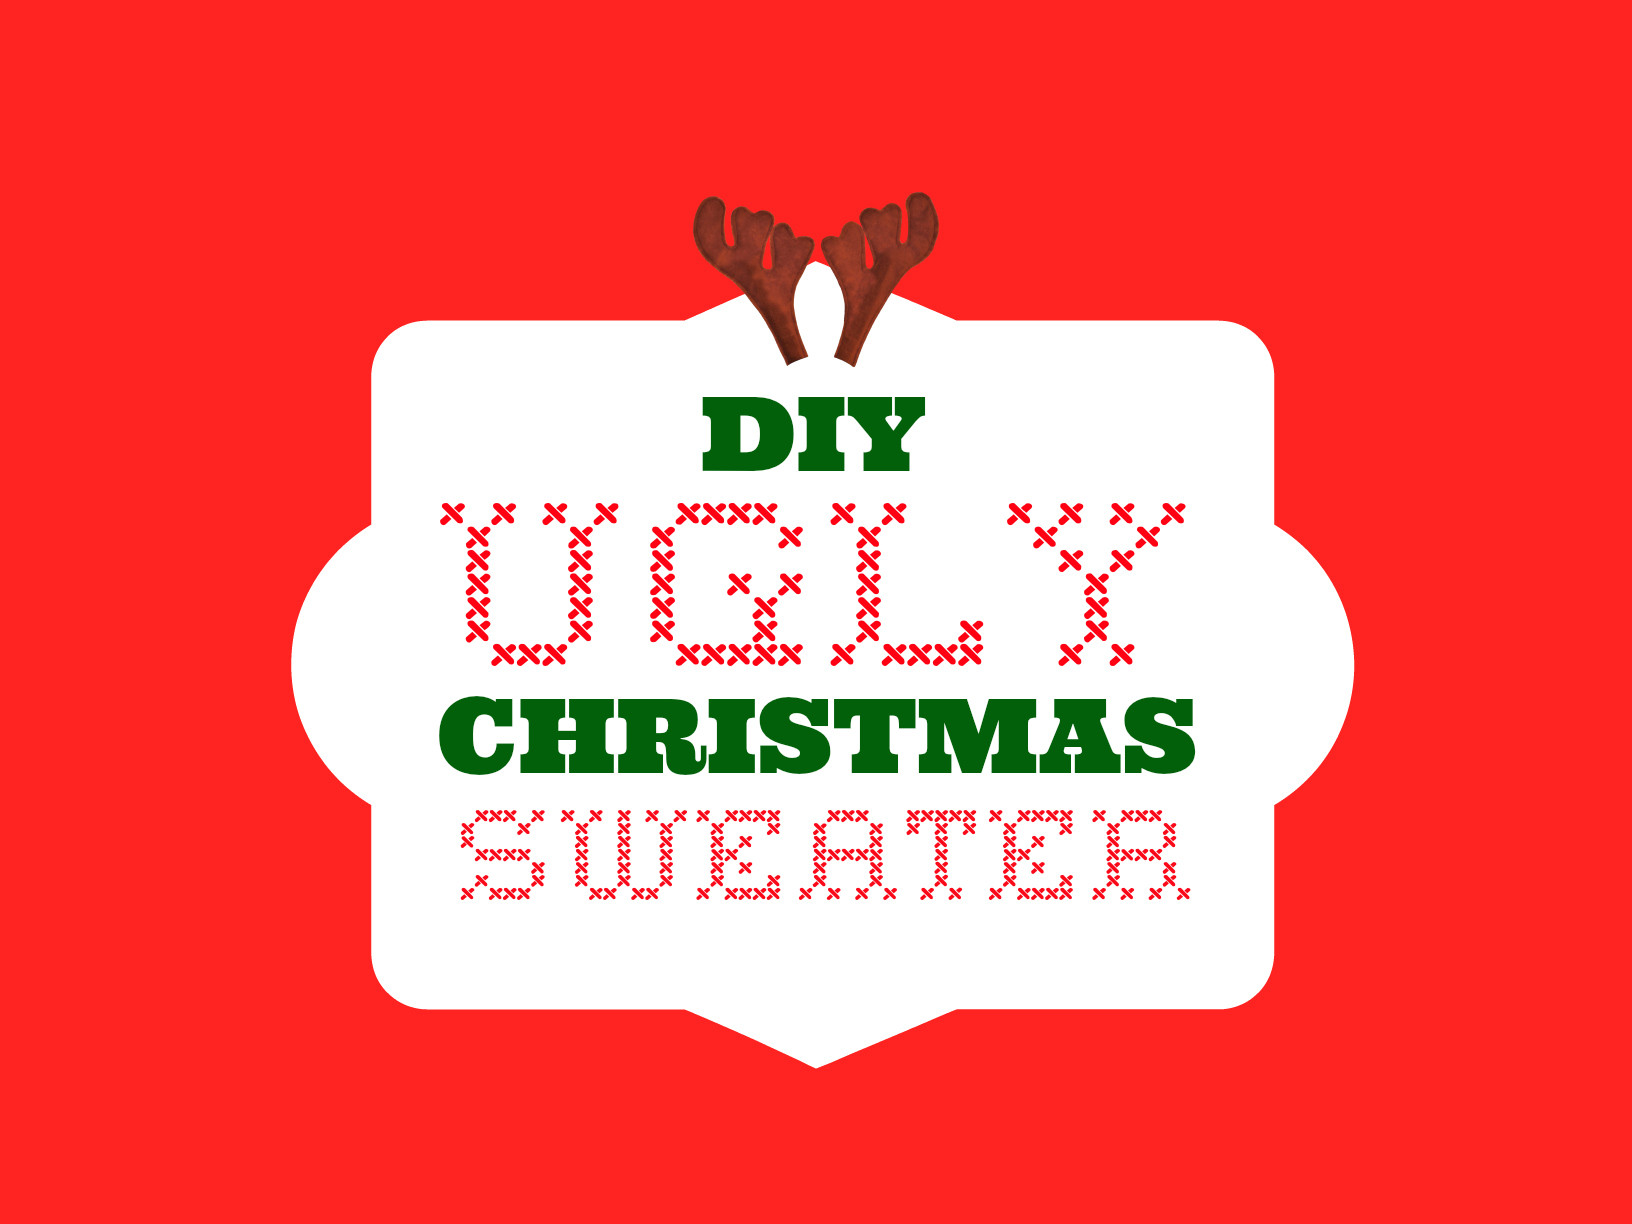 Ugly Christmas Sweater Quotes
 DIY Ugly Christmas Sweater It s So Ugly It s Cute